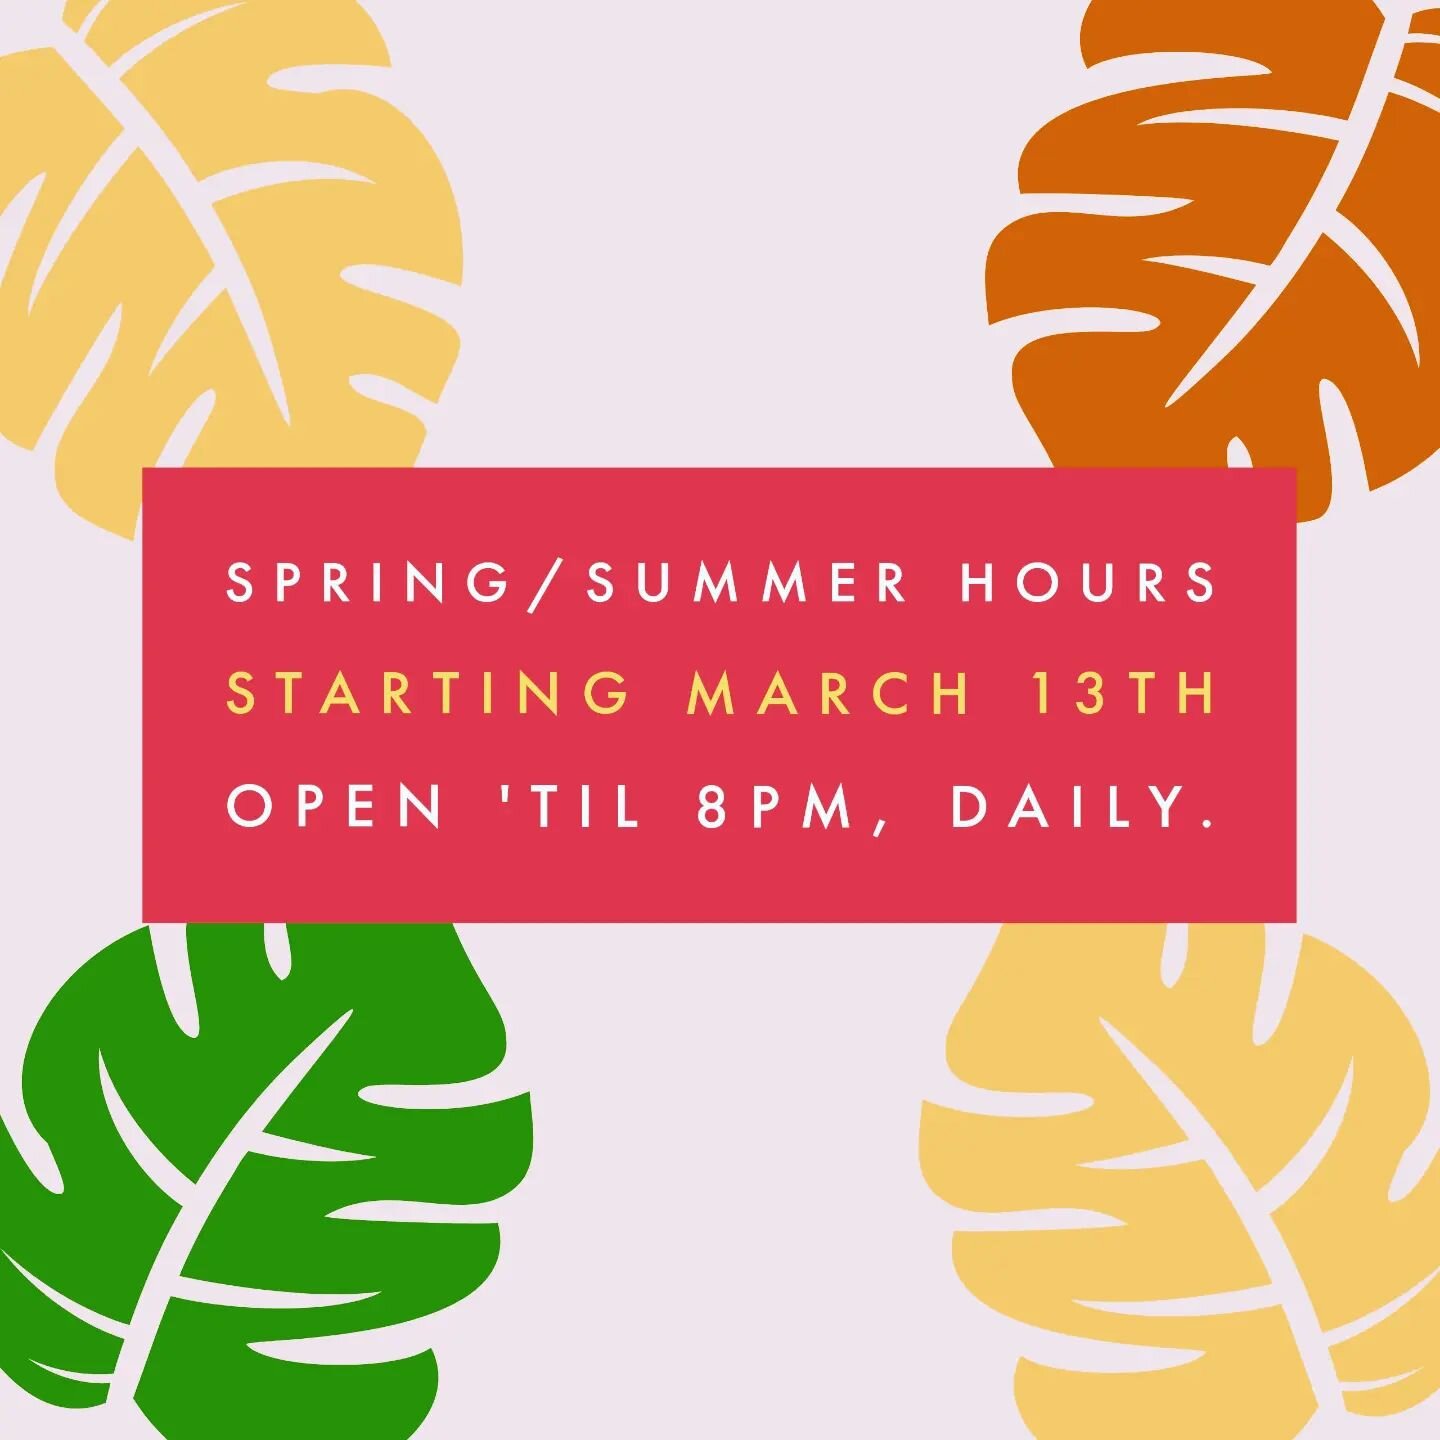 Believe it or not, Spring starts next week!  Our extended hours start today - we will be open until 8pm everyday... Just as long as the weather cooperates..☔